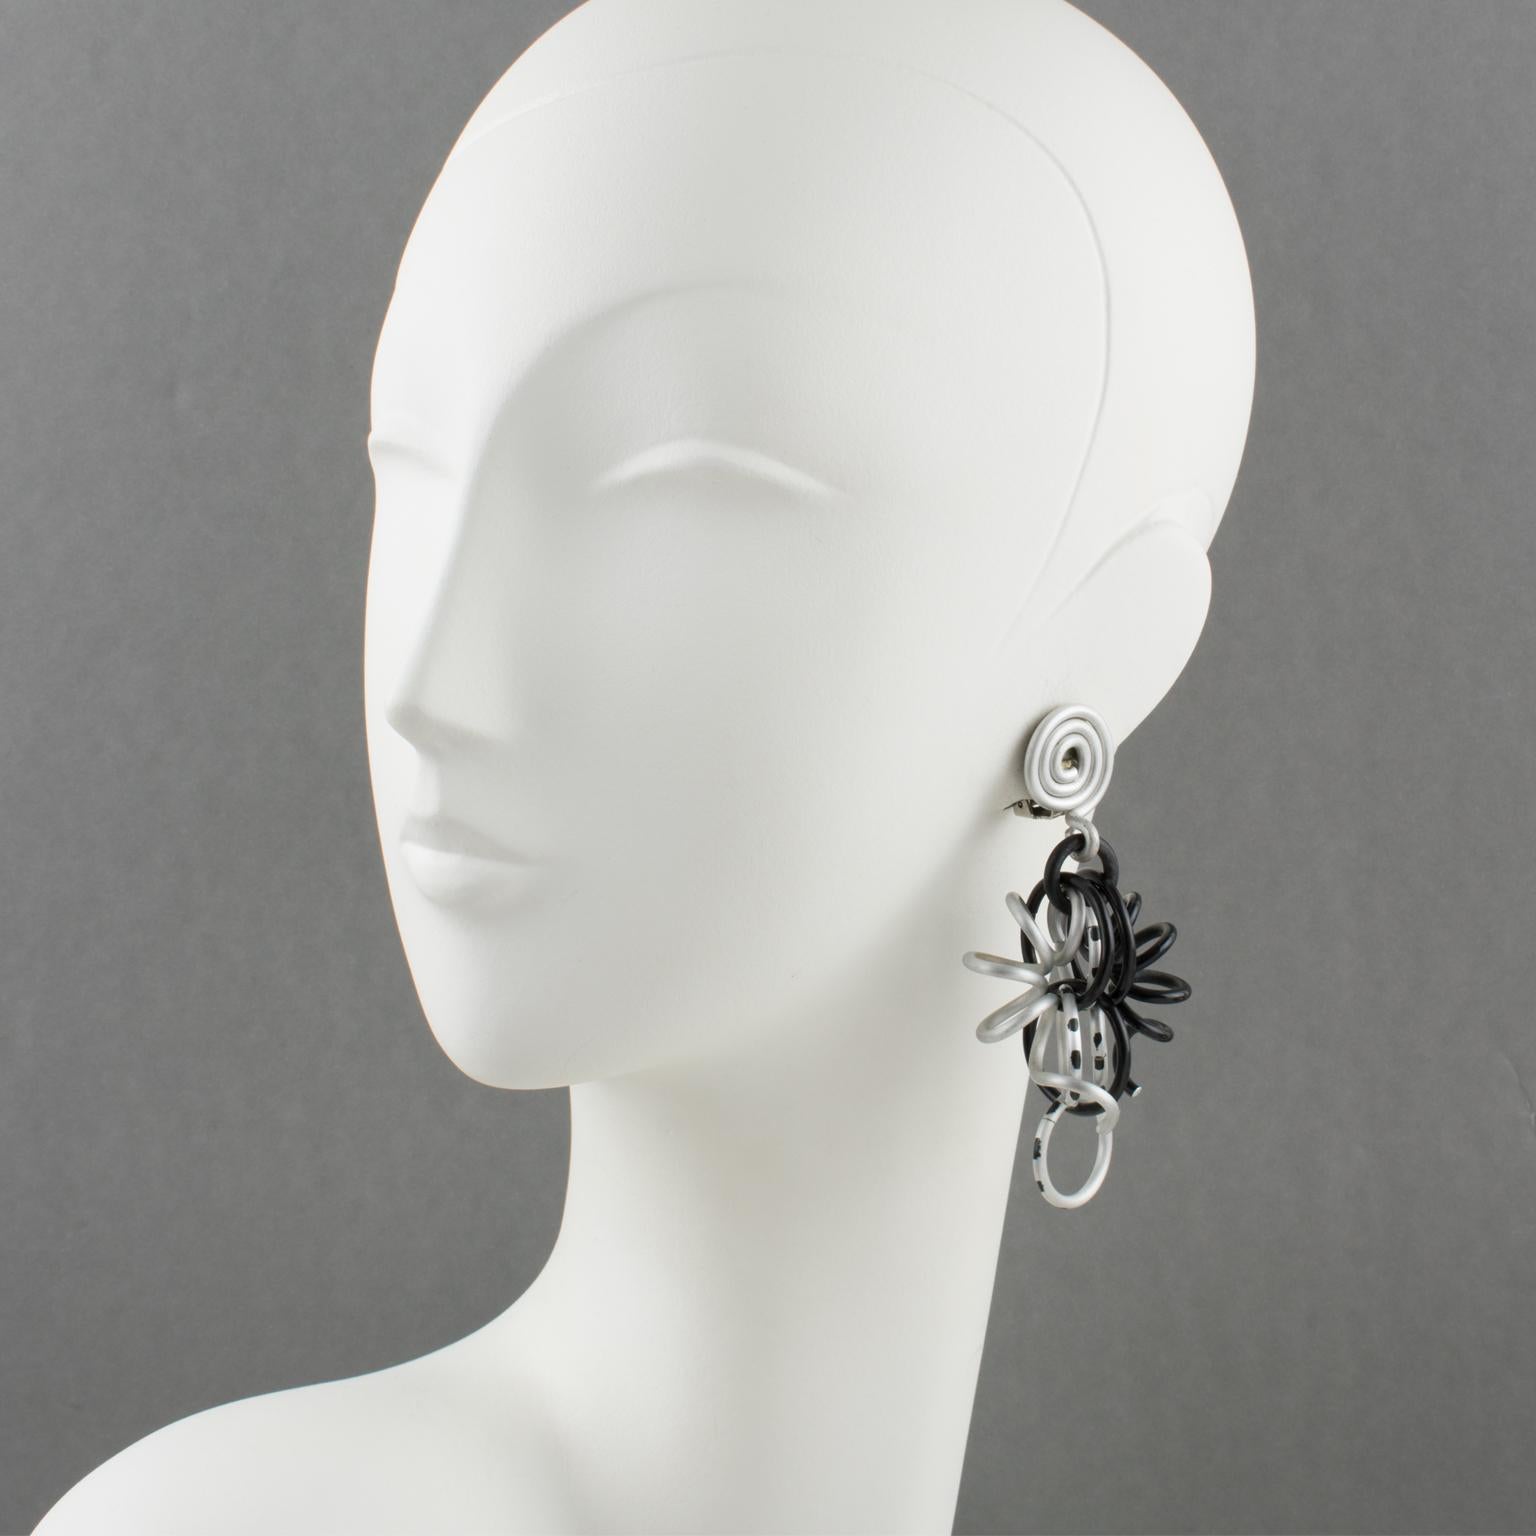 Elegant David Spada, New York signed dangling clip-on earrings. Featuring a cool Space Age 1980s design with dangle articulated spirally coiled elements along with assorted size rings. Anodized aluminum metal with classy colors (black and silver).